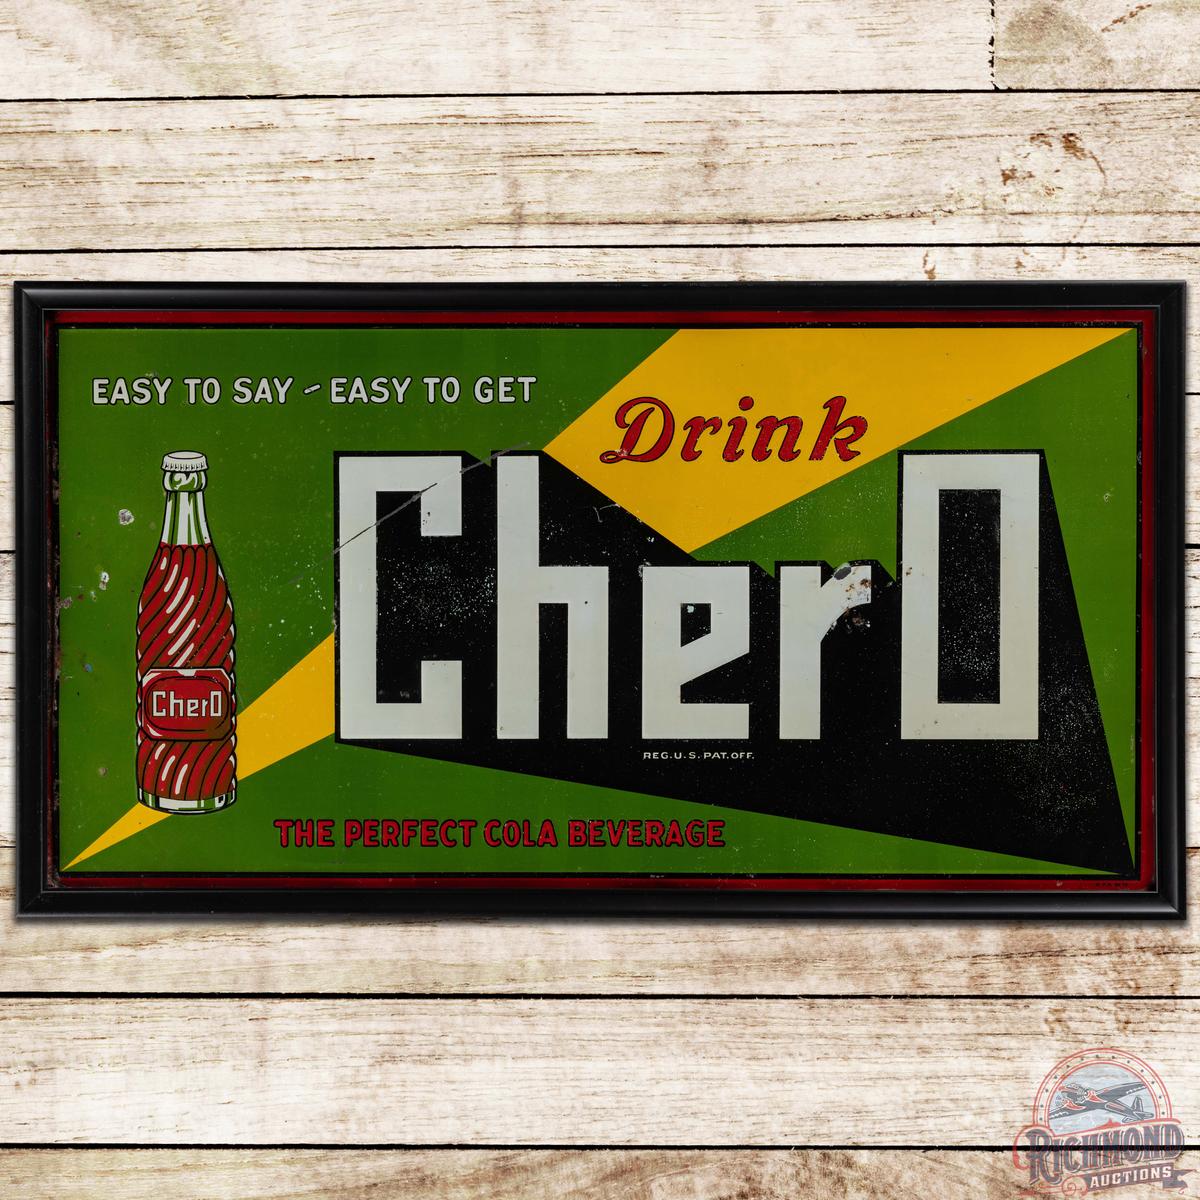 Drink Chero "The Perfect Cola Beverage" Emb. SS Tin Sign w/ Bottle